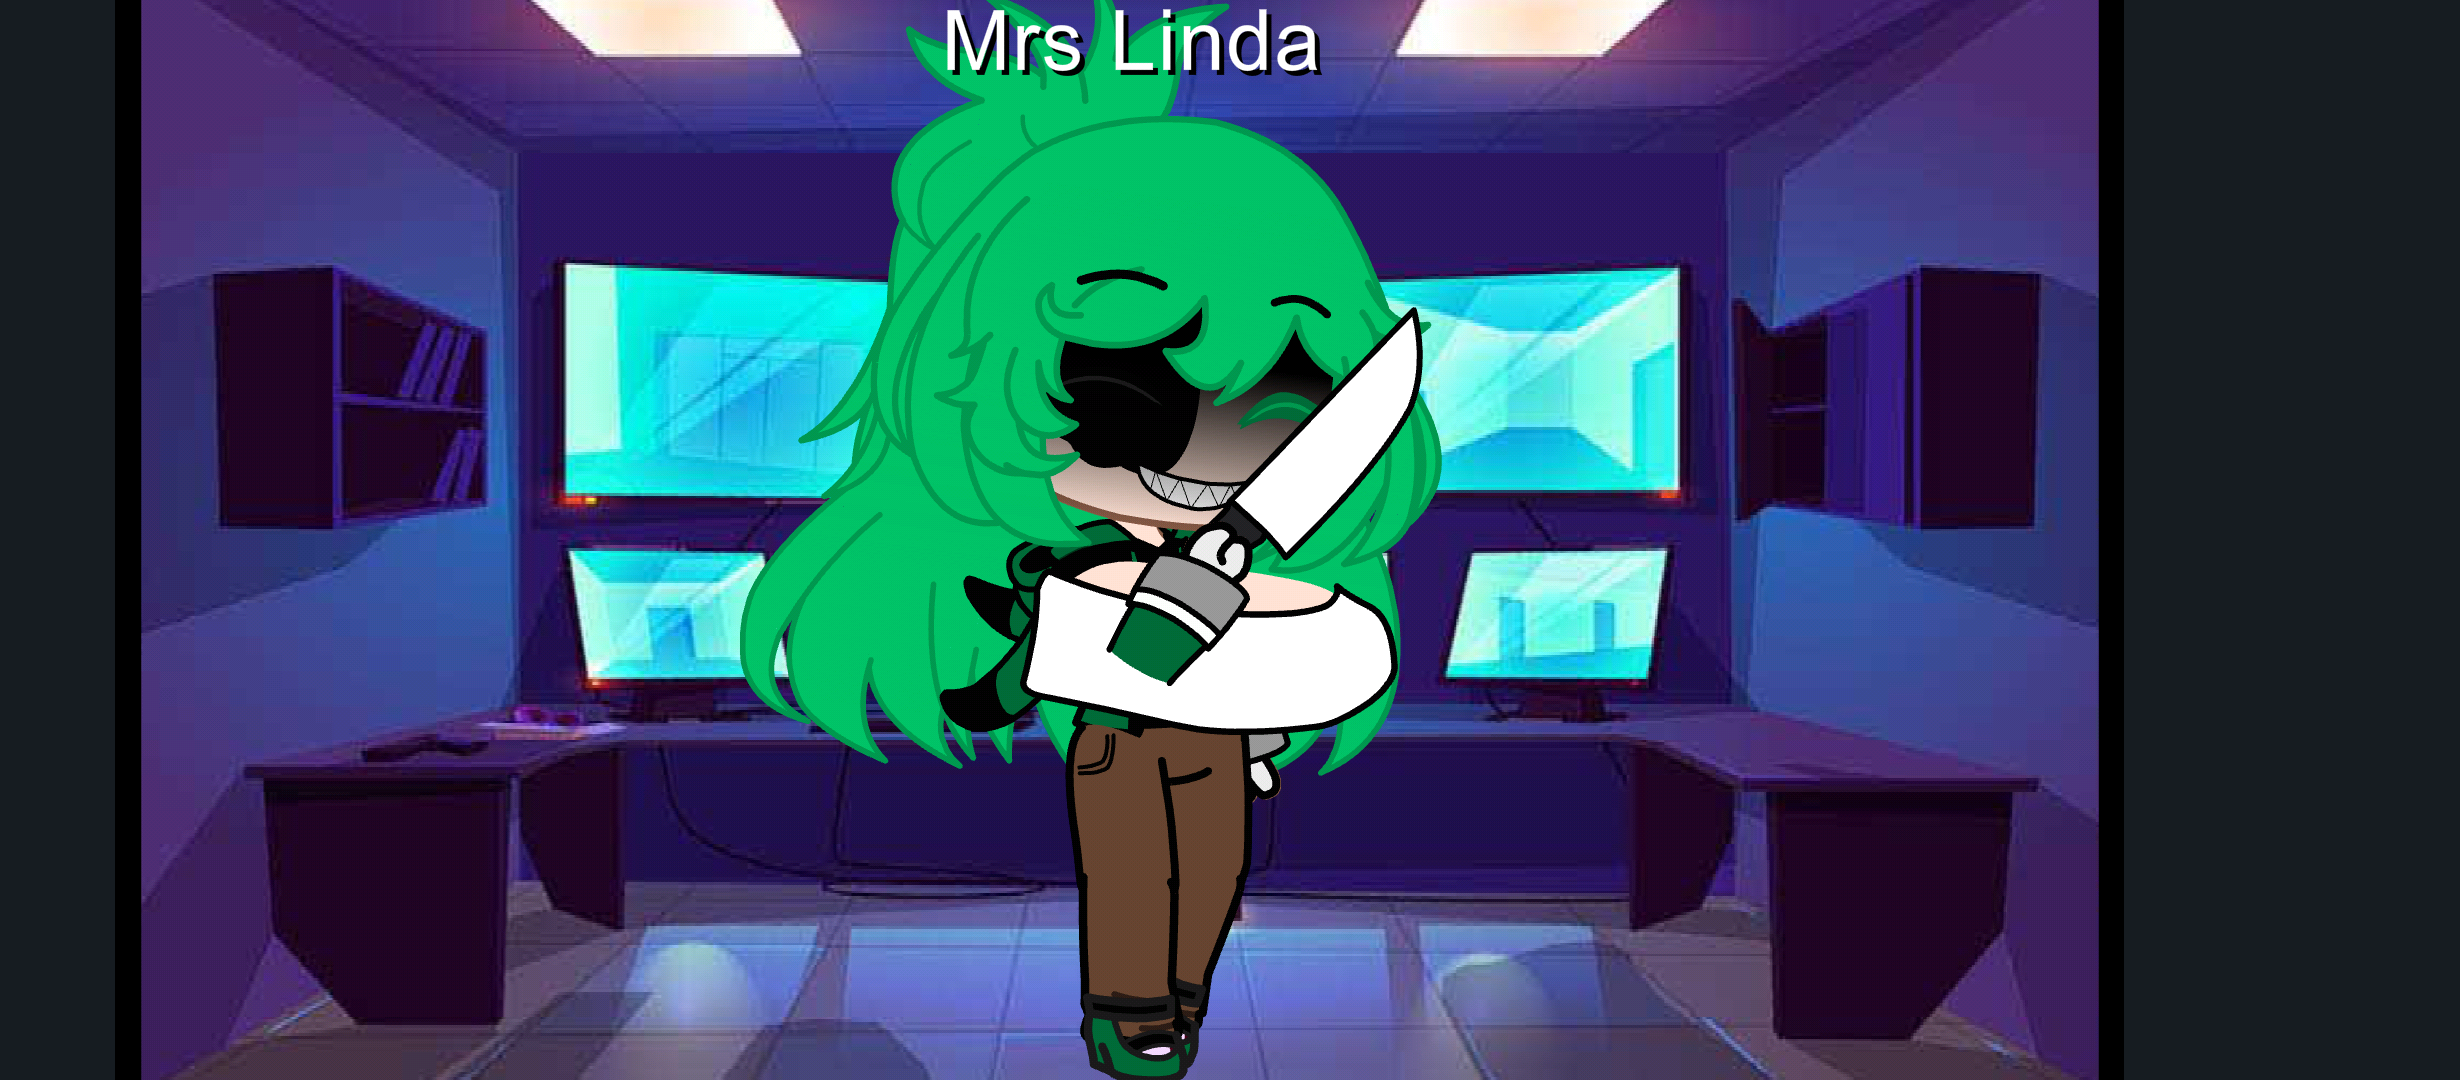 Mrs Linda the green imposter and her parasite monster form